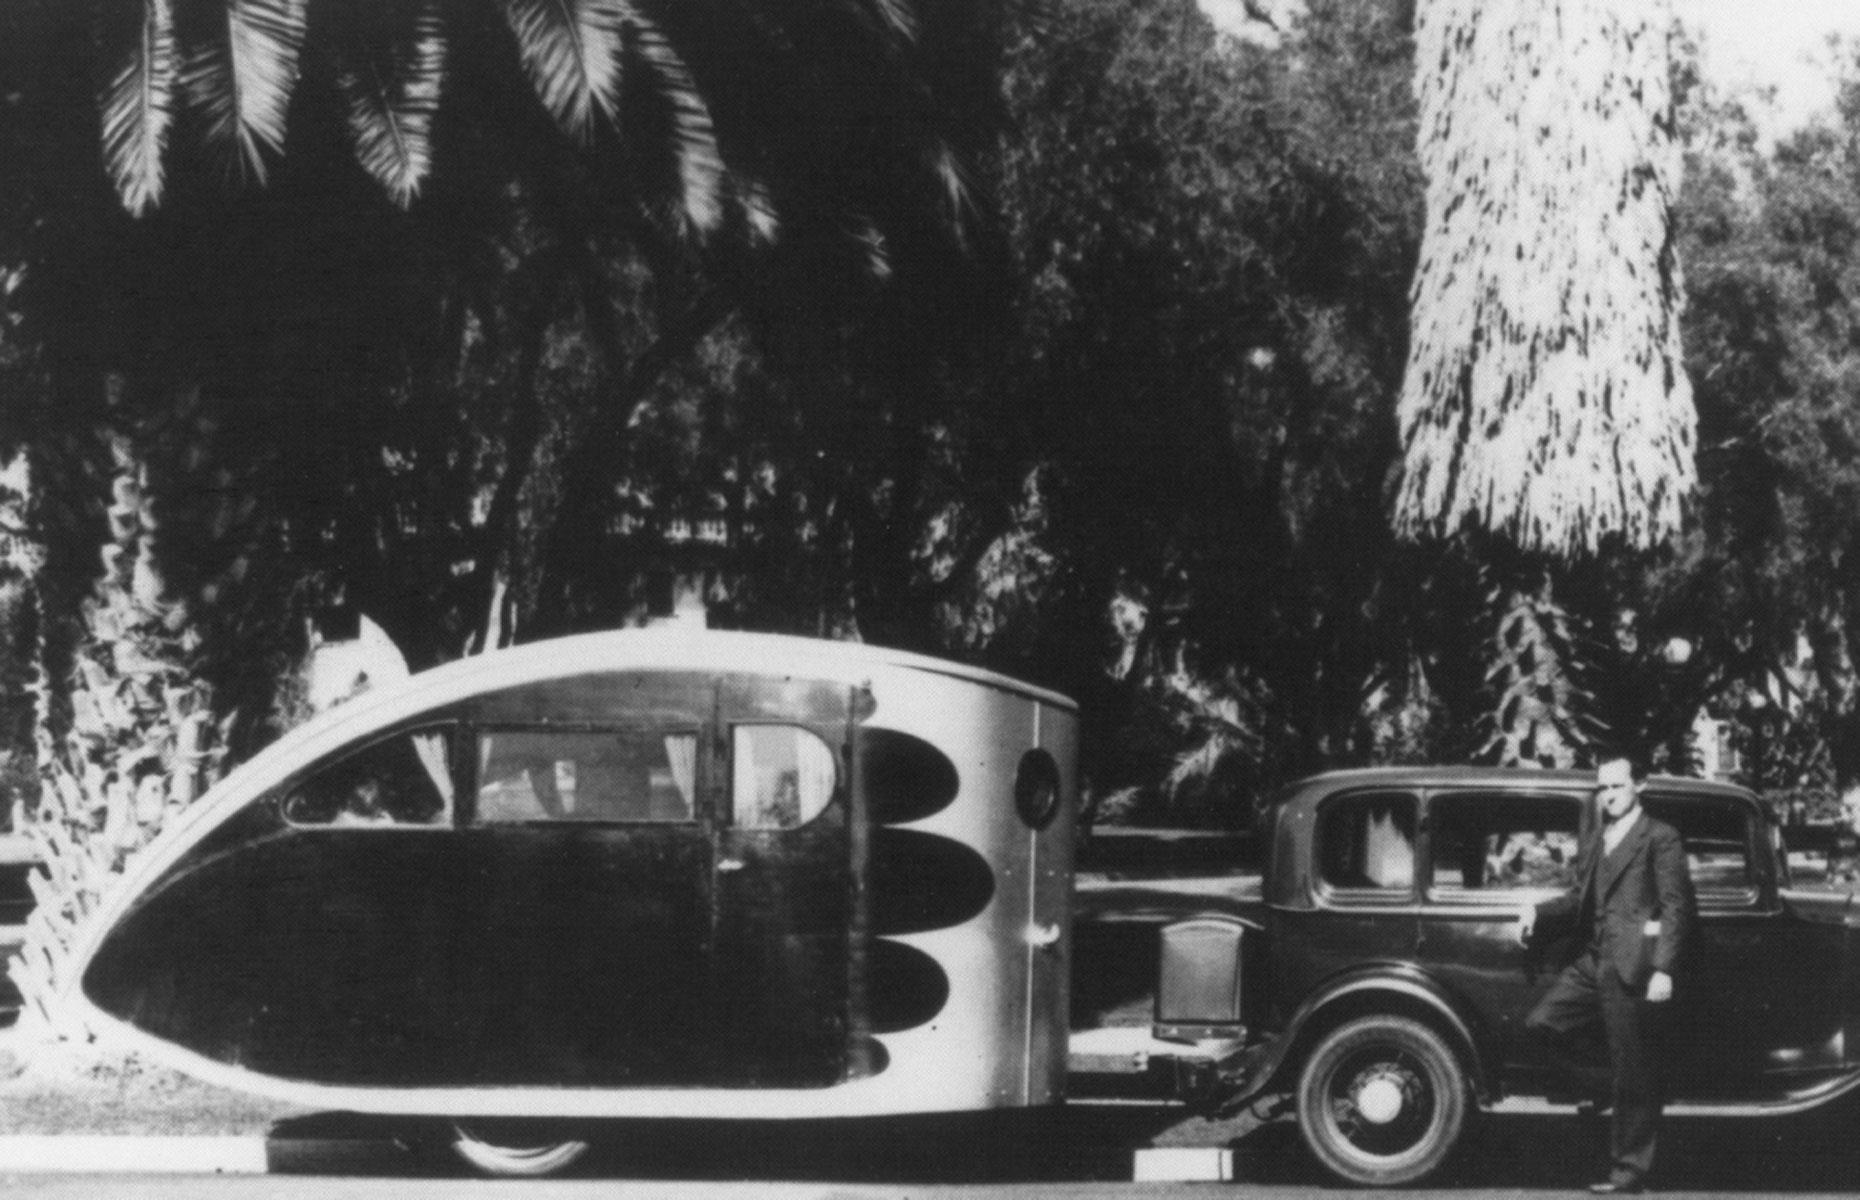 In 1929, Wally Byam, an advertising executive and keen adventurer, built the first Airstream trailer – a teardrop-shaped canvas and Masonite shelter attached to a Ford Model T chassis. His inspiration was his wife Marion, who was fed up camping in draughty tents. It had sleeping space, an ice chest and a stove.